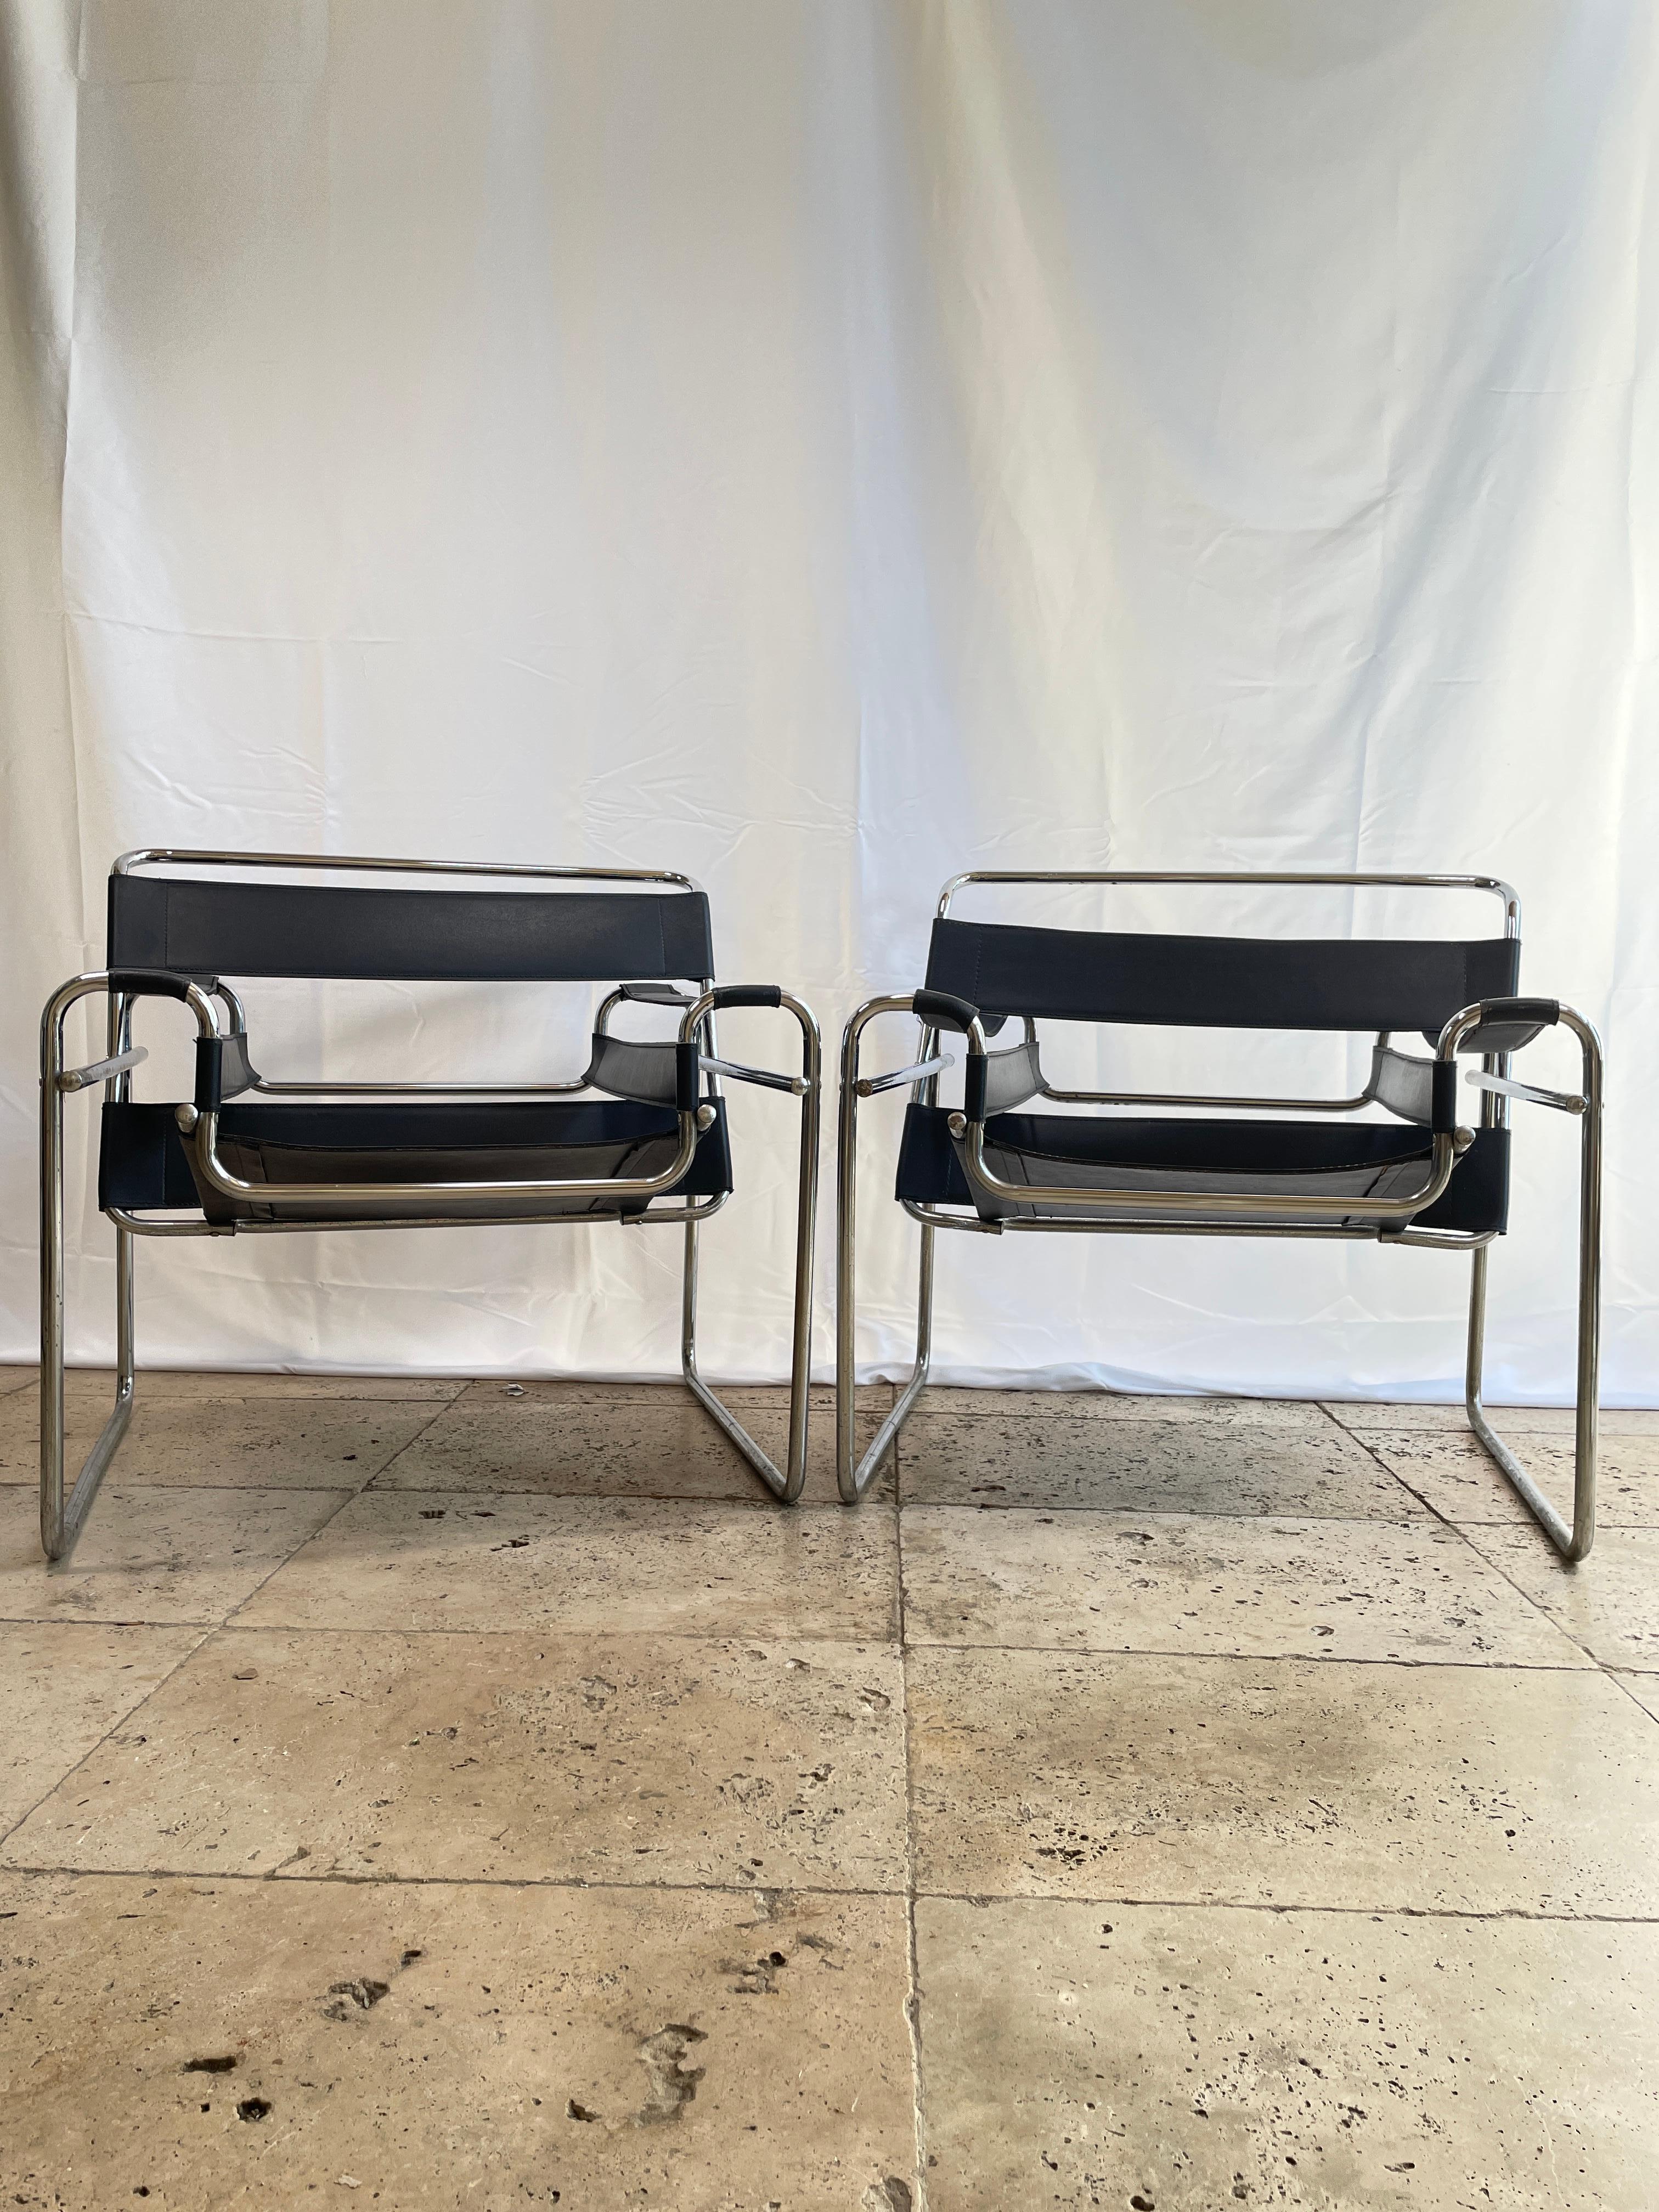 Marcel Breuer Inspired by the frame of a bicycle and influenced by the constructivist theories of the De Stjil movement, Marcel Breuer was still an apprentice at the Bauhaus when he reduced the classic club chair to its elemental lines and planes,